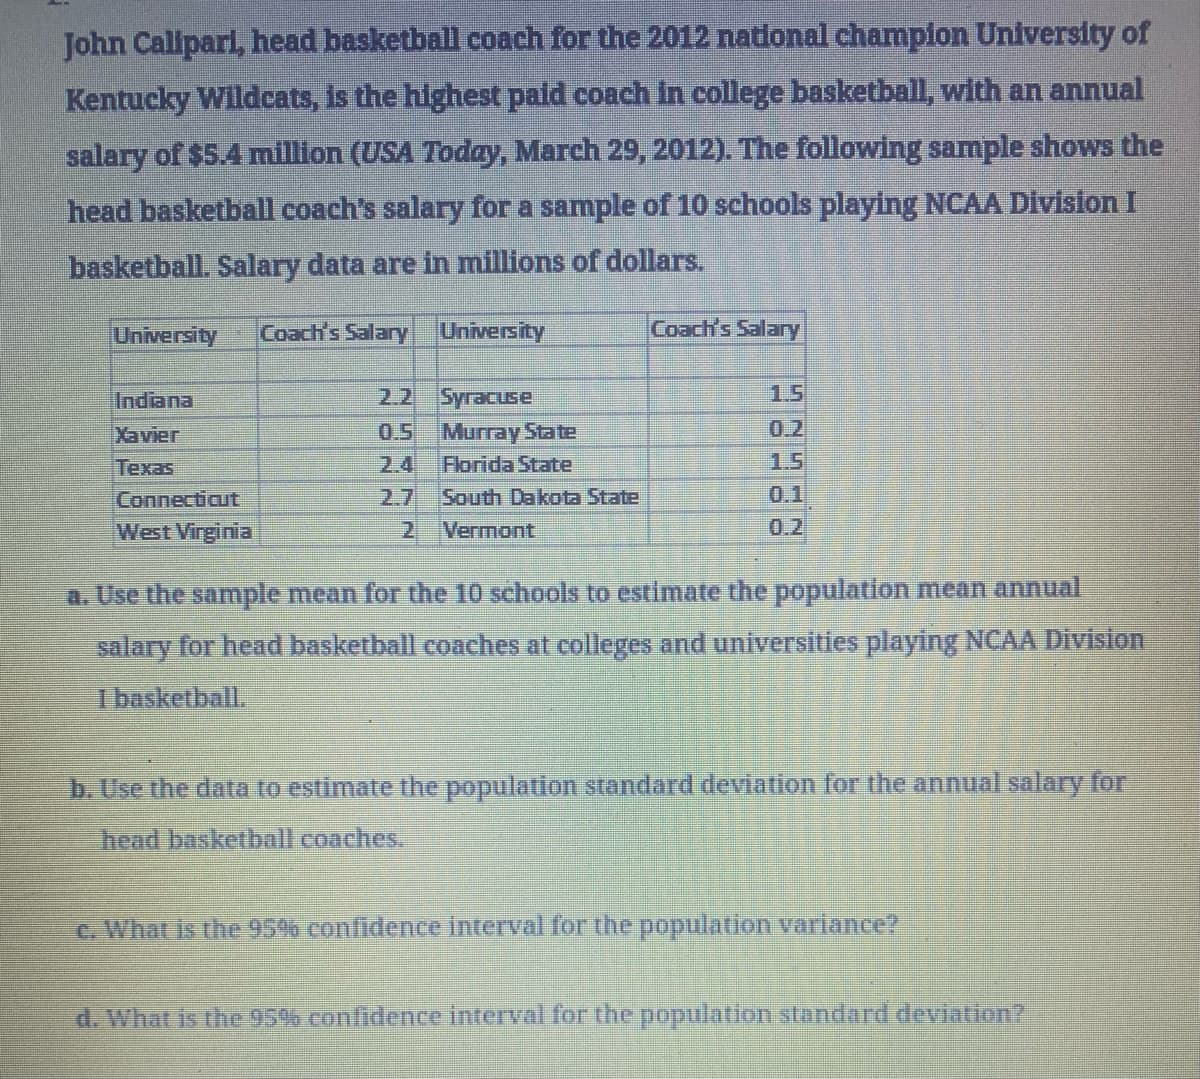 John Calipari, head basketball coach for the 2012 national champion University of
Kentucky Wildcats, is the highest paid coach in college basketball, with an annual
salary of $5.4 million (USA Today, March 29, 2012). The following sample shows the
head basketball coach's salary for a sample of 10 schools playing NCAA Division I
basketball. Salary data are in millions of dollars.
University Coach's Salary
University
Coach's Salary
Indiana
2.2
Syracuse
1.5
Xavier
0.5
Murray State
0.2
Texas
2.4
Florida State
1.5
Connecticut
2.7
South Dakota State
0.1
West Virginia
2
Vermont
0.2
a. Use the sample mean for the 10 schools to estimate the population mean annual
salary for head basketball coaches at colleges and universities playing NCAA Division
I basketball.
b. Use the data to estimate the population standard deviation for the annual salary for
head basketball coaches.
c. What is the 95% confidence interval for the population variance?
d. What is the 95% confidence interval for the population standard deviation?